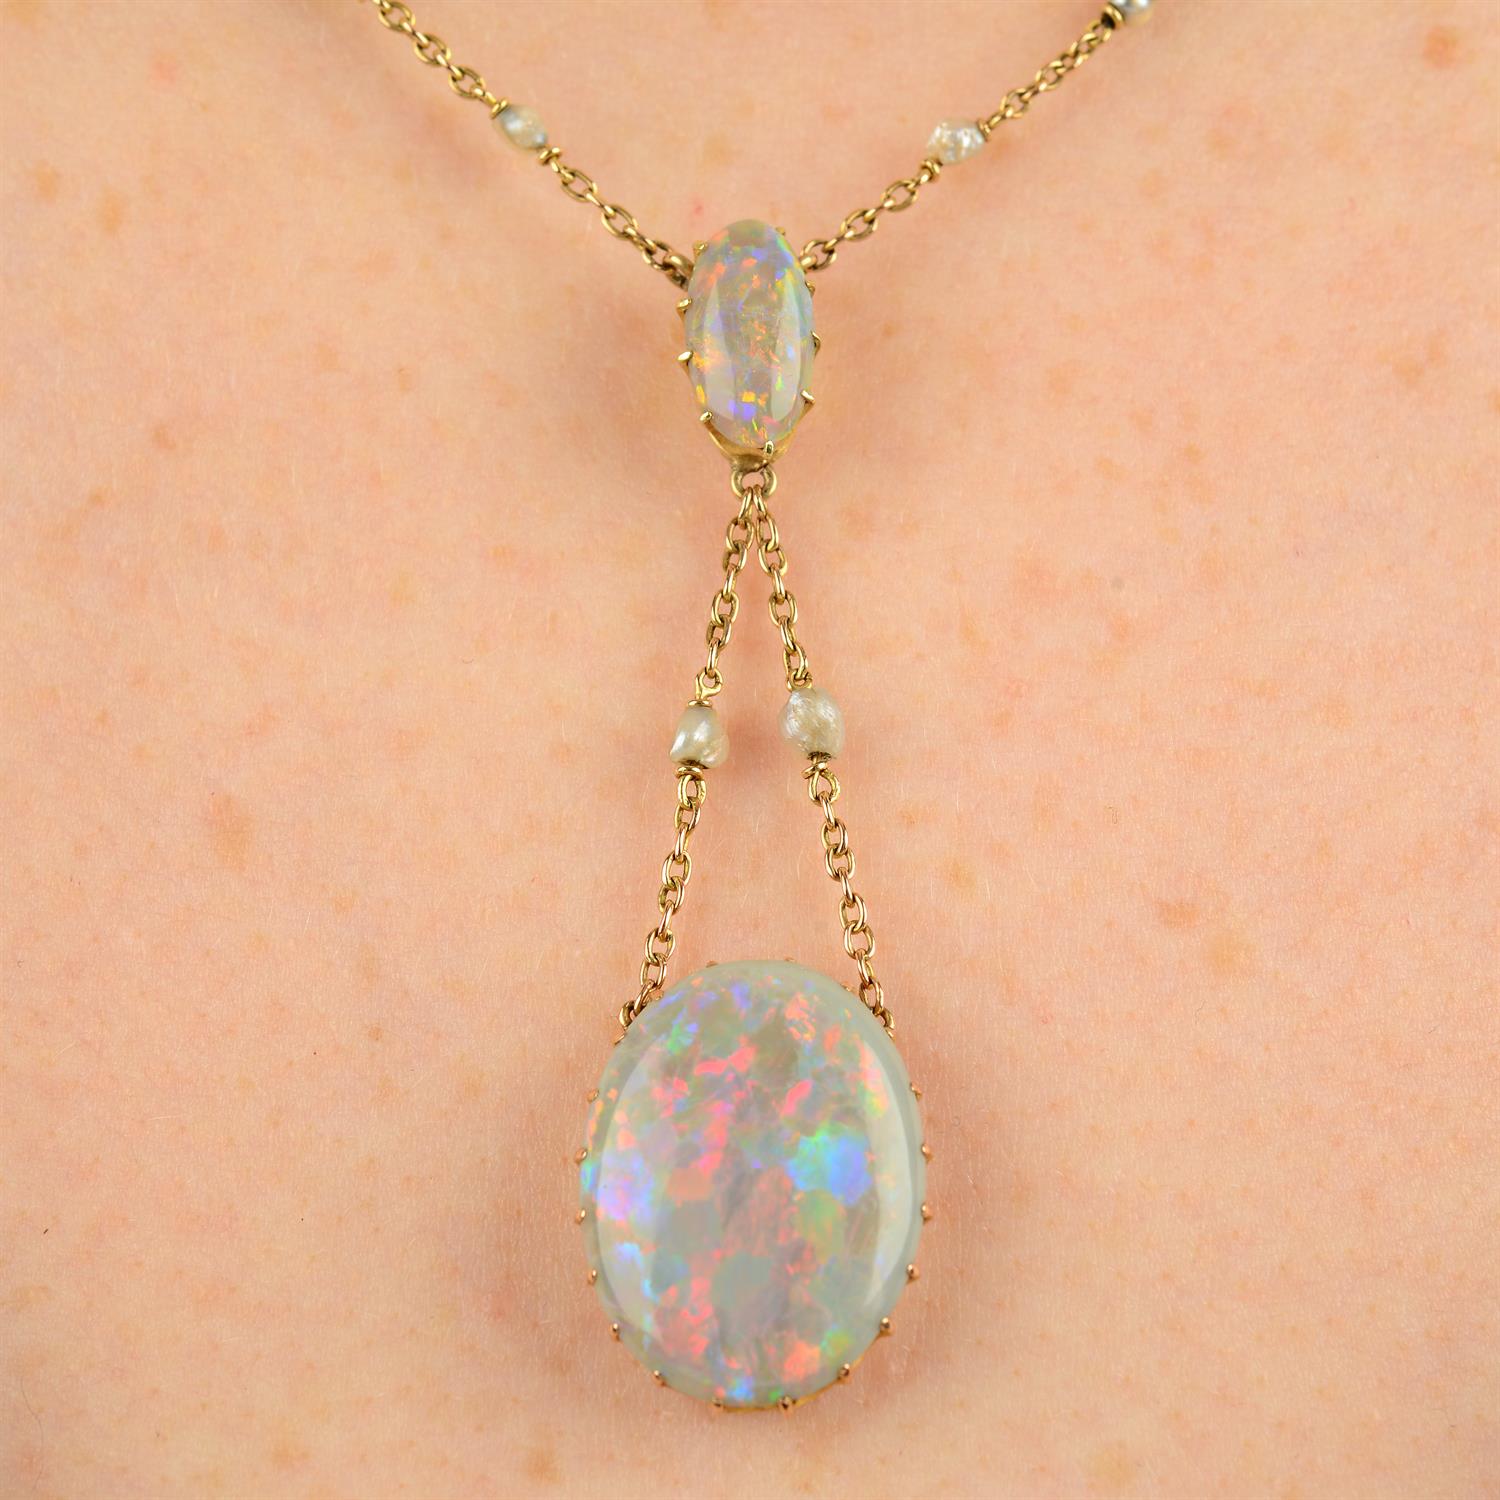 An early 20th century 14ct gold opal necklace, with seed pearl spacer trace-link chain.